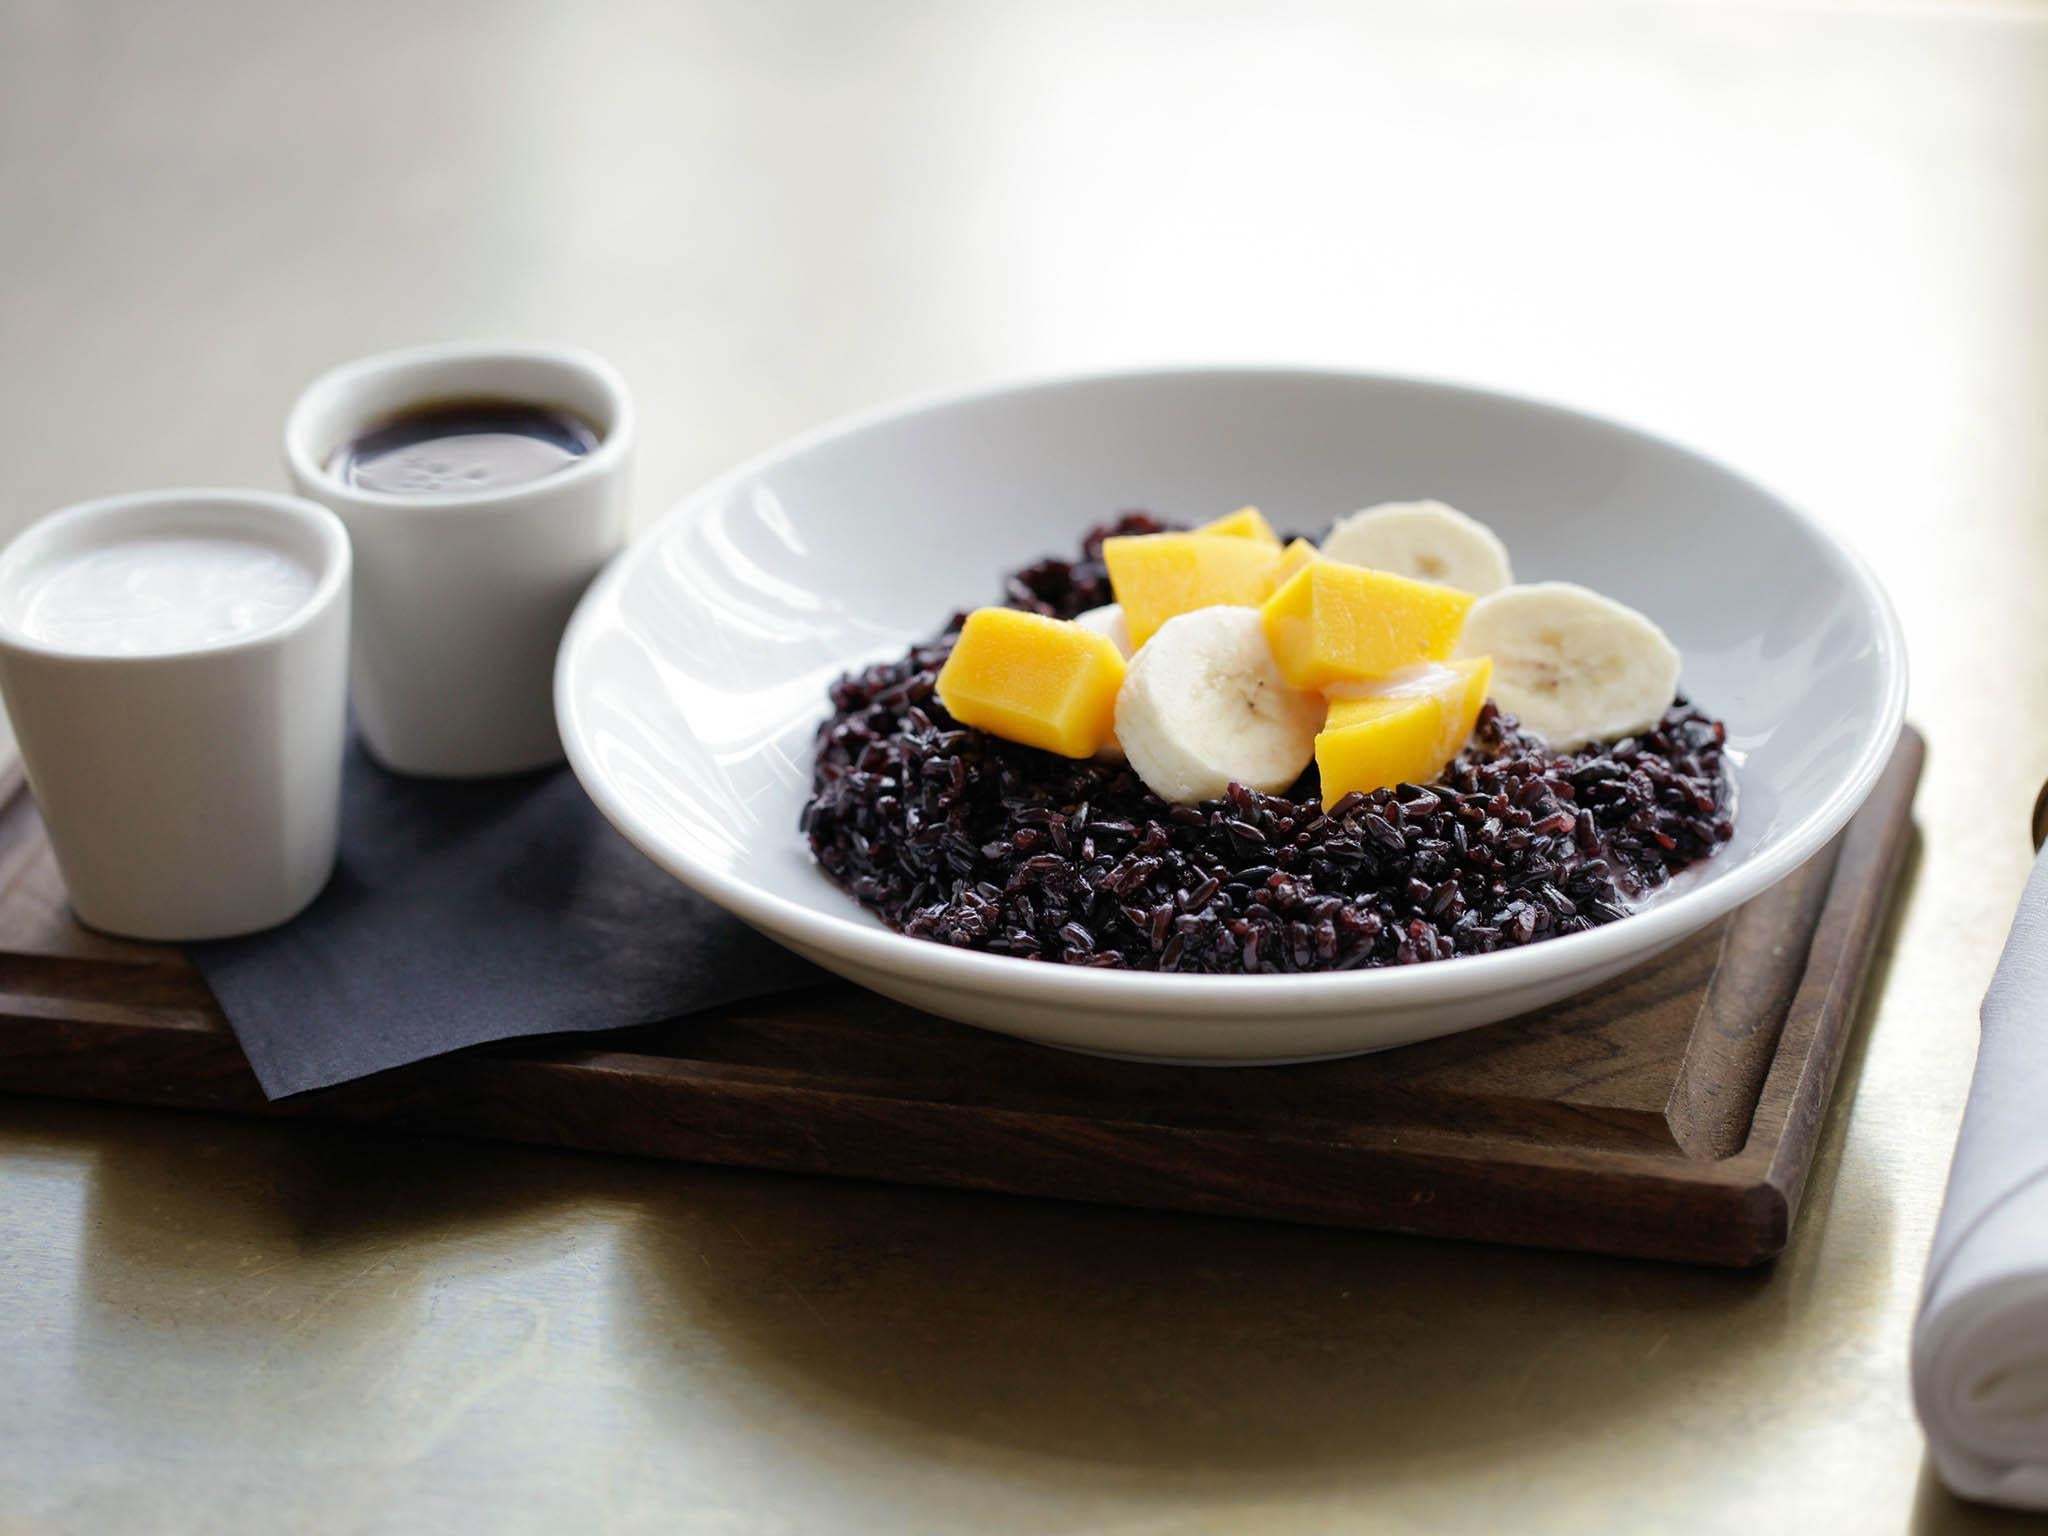 Nopi's black rice dish is completely gluten free